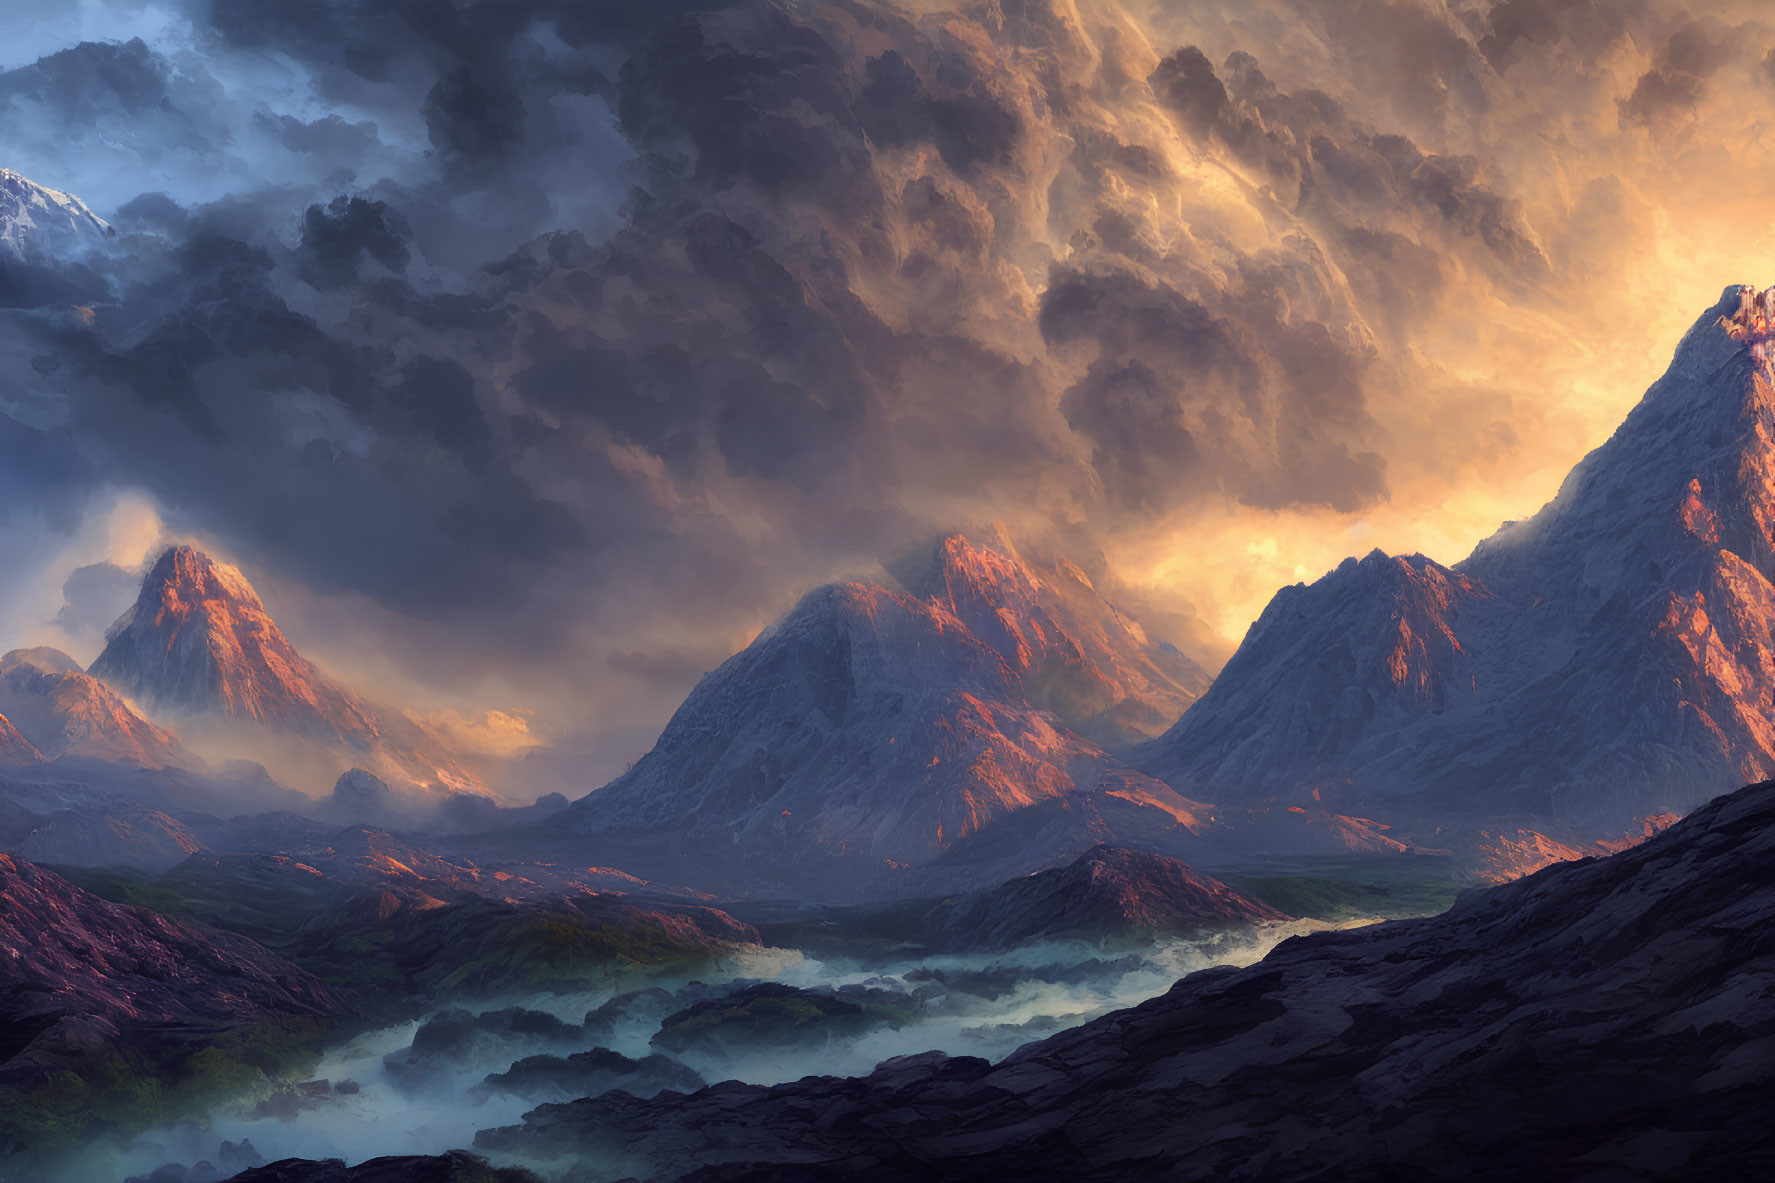 Dramatic landscape of rugged mountains under tumultuous sky